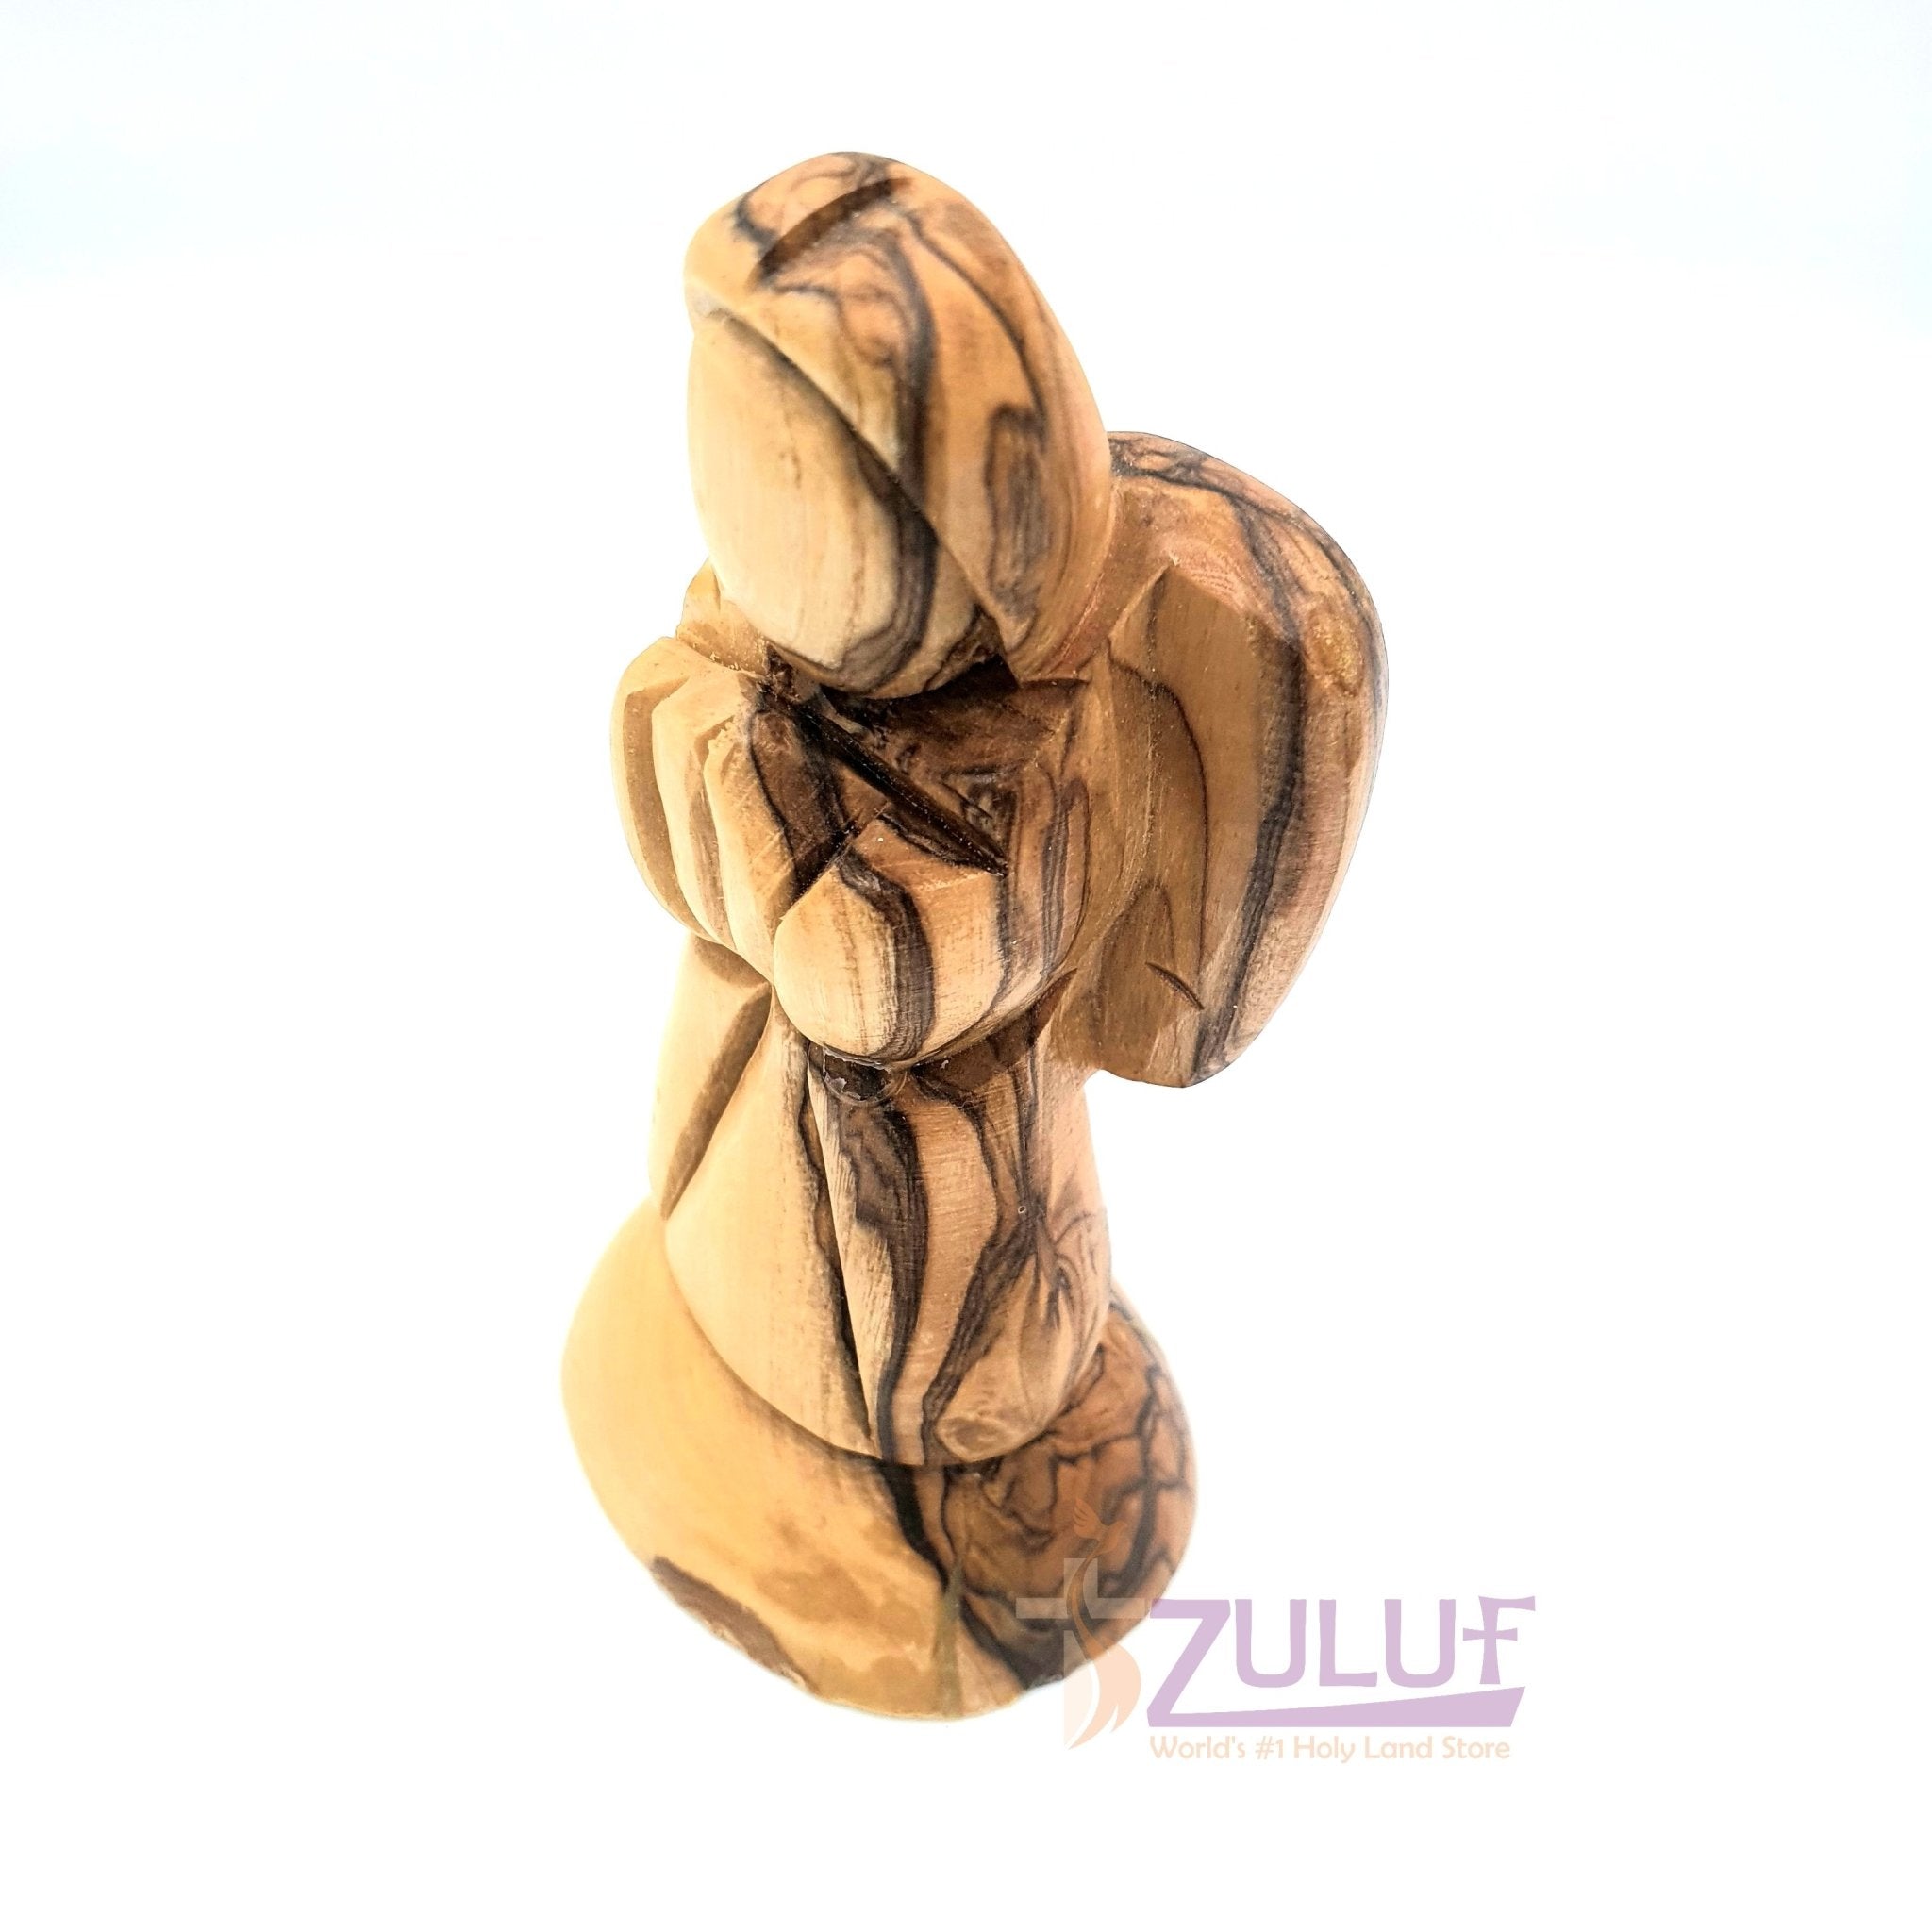 Authentic Hand Carved Olive Wood Christmas Little Praying Angel Holy Land ANG028 - Zuluf